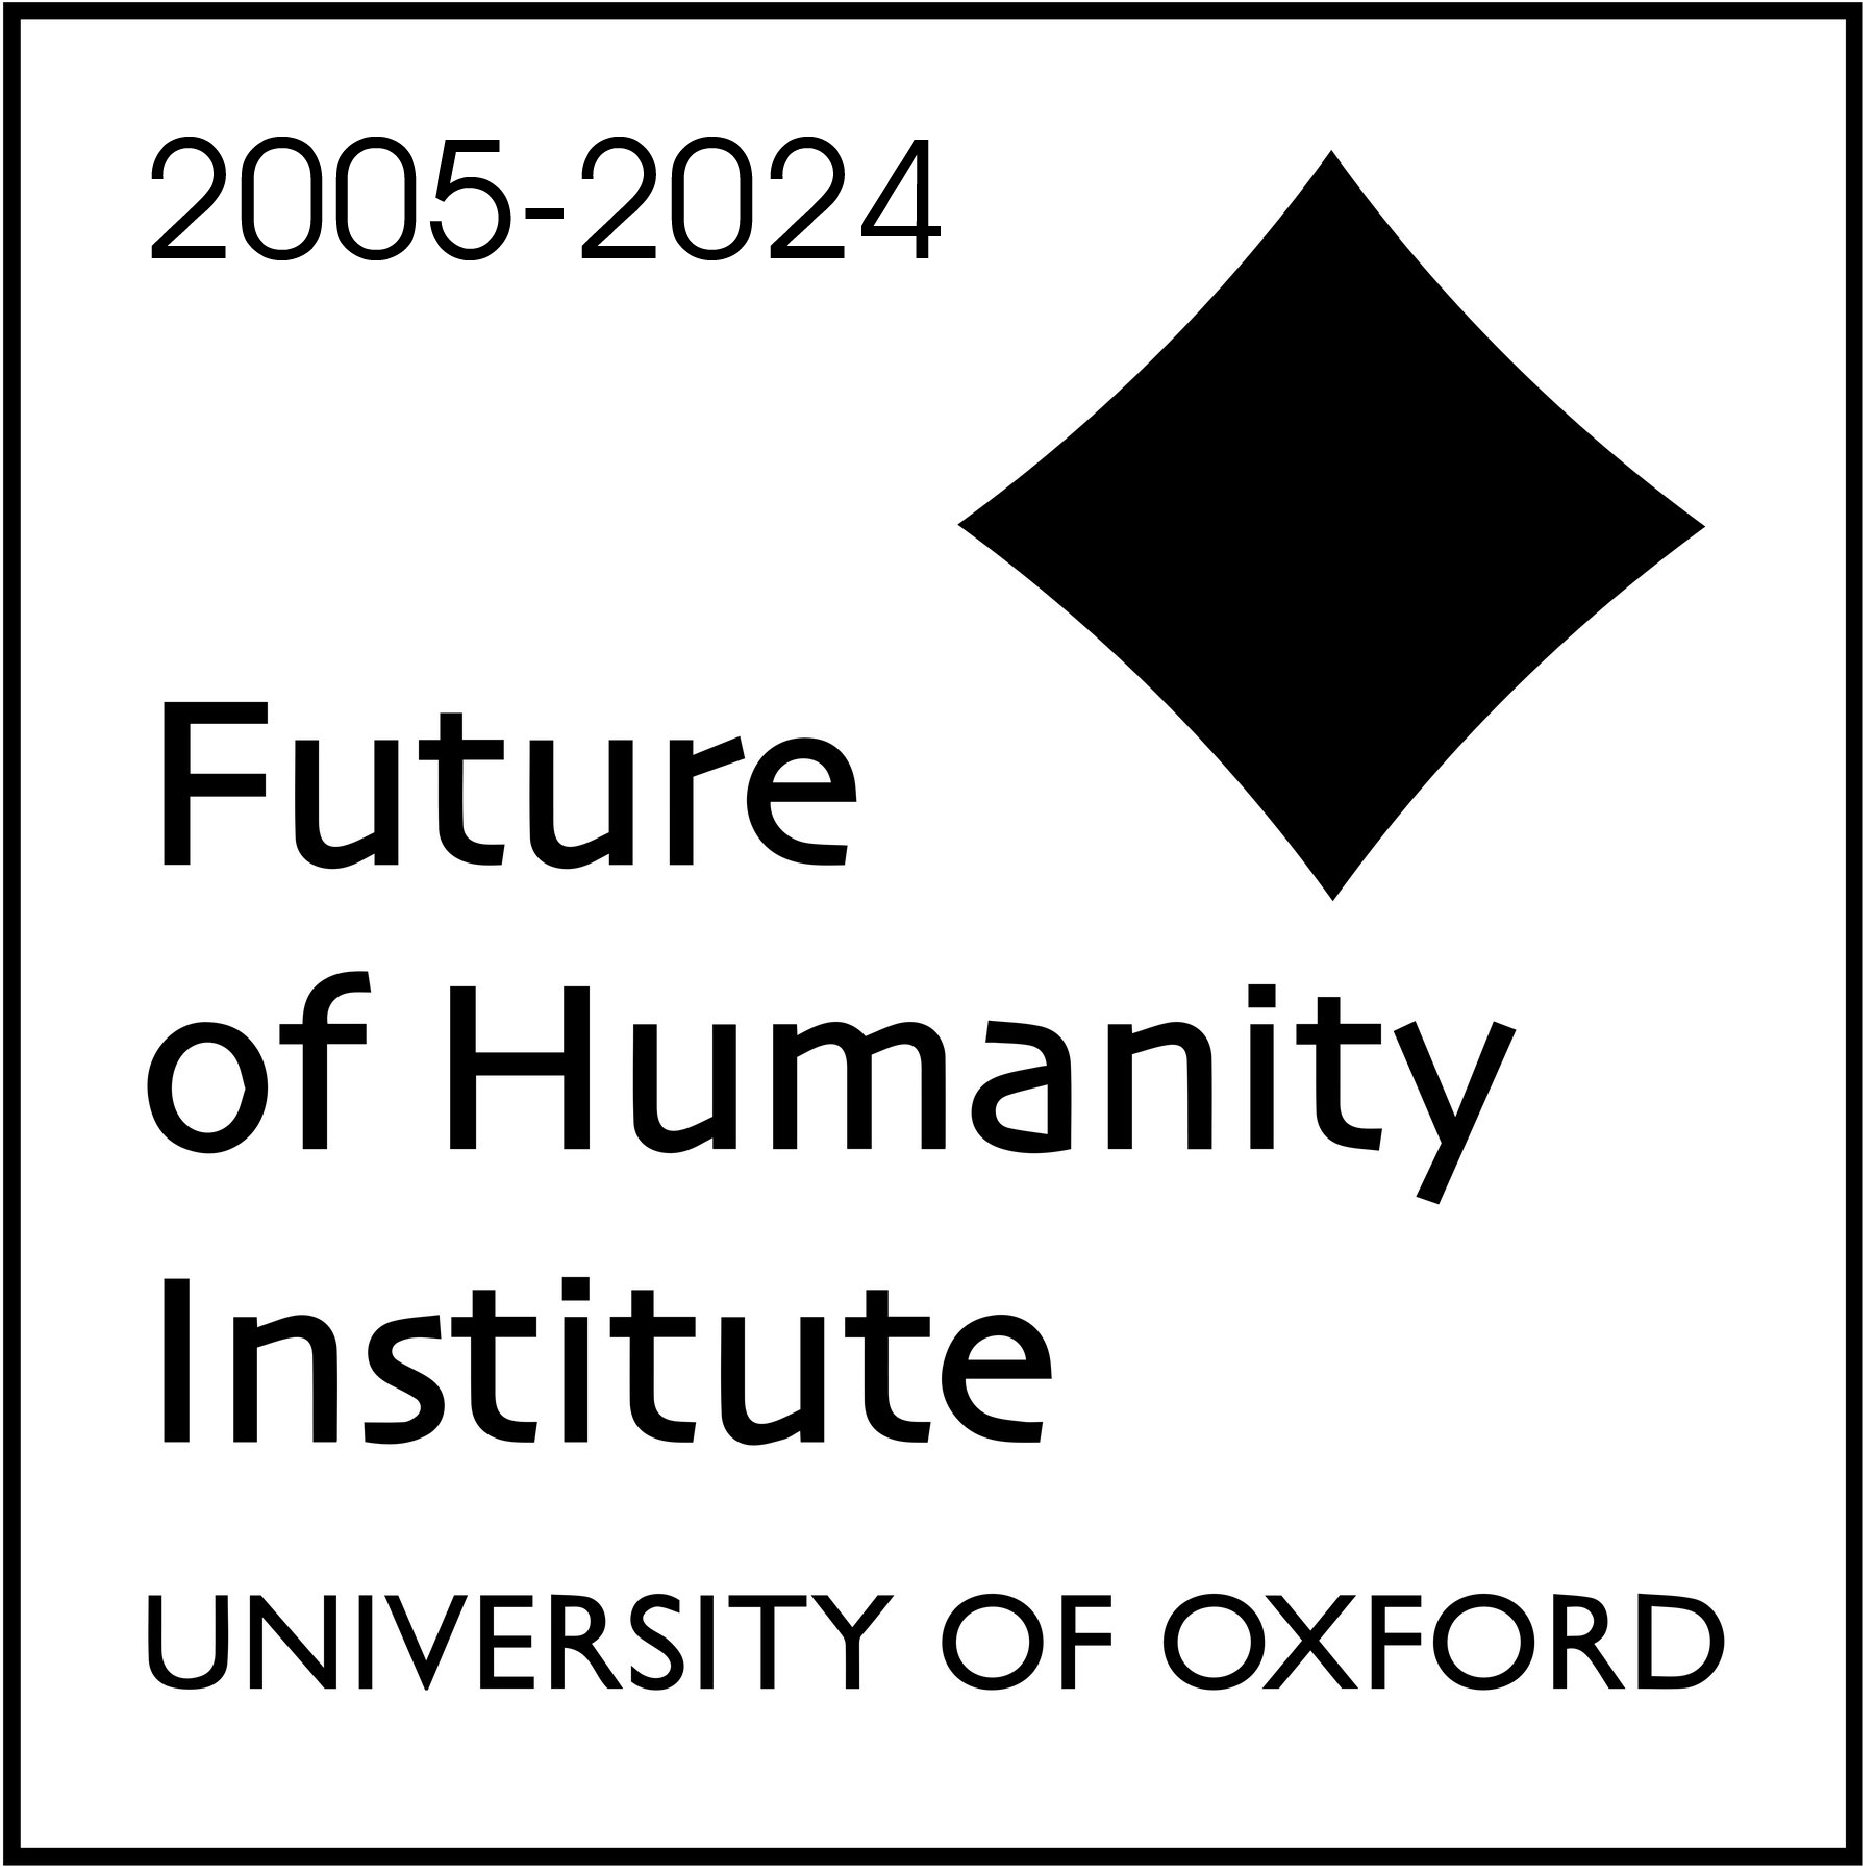 FHI (Future of Humanity Institute) - The tools of mathematics, philosophy and social sciences to bear on big-picture questions about humanity and its prospects